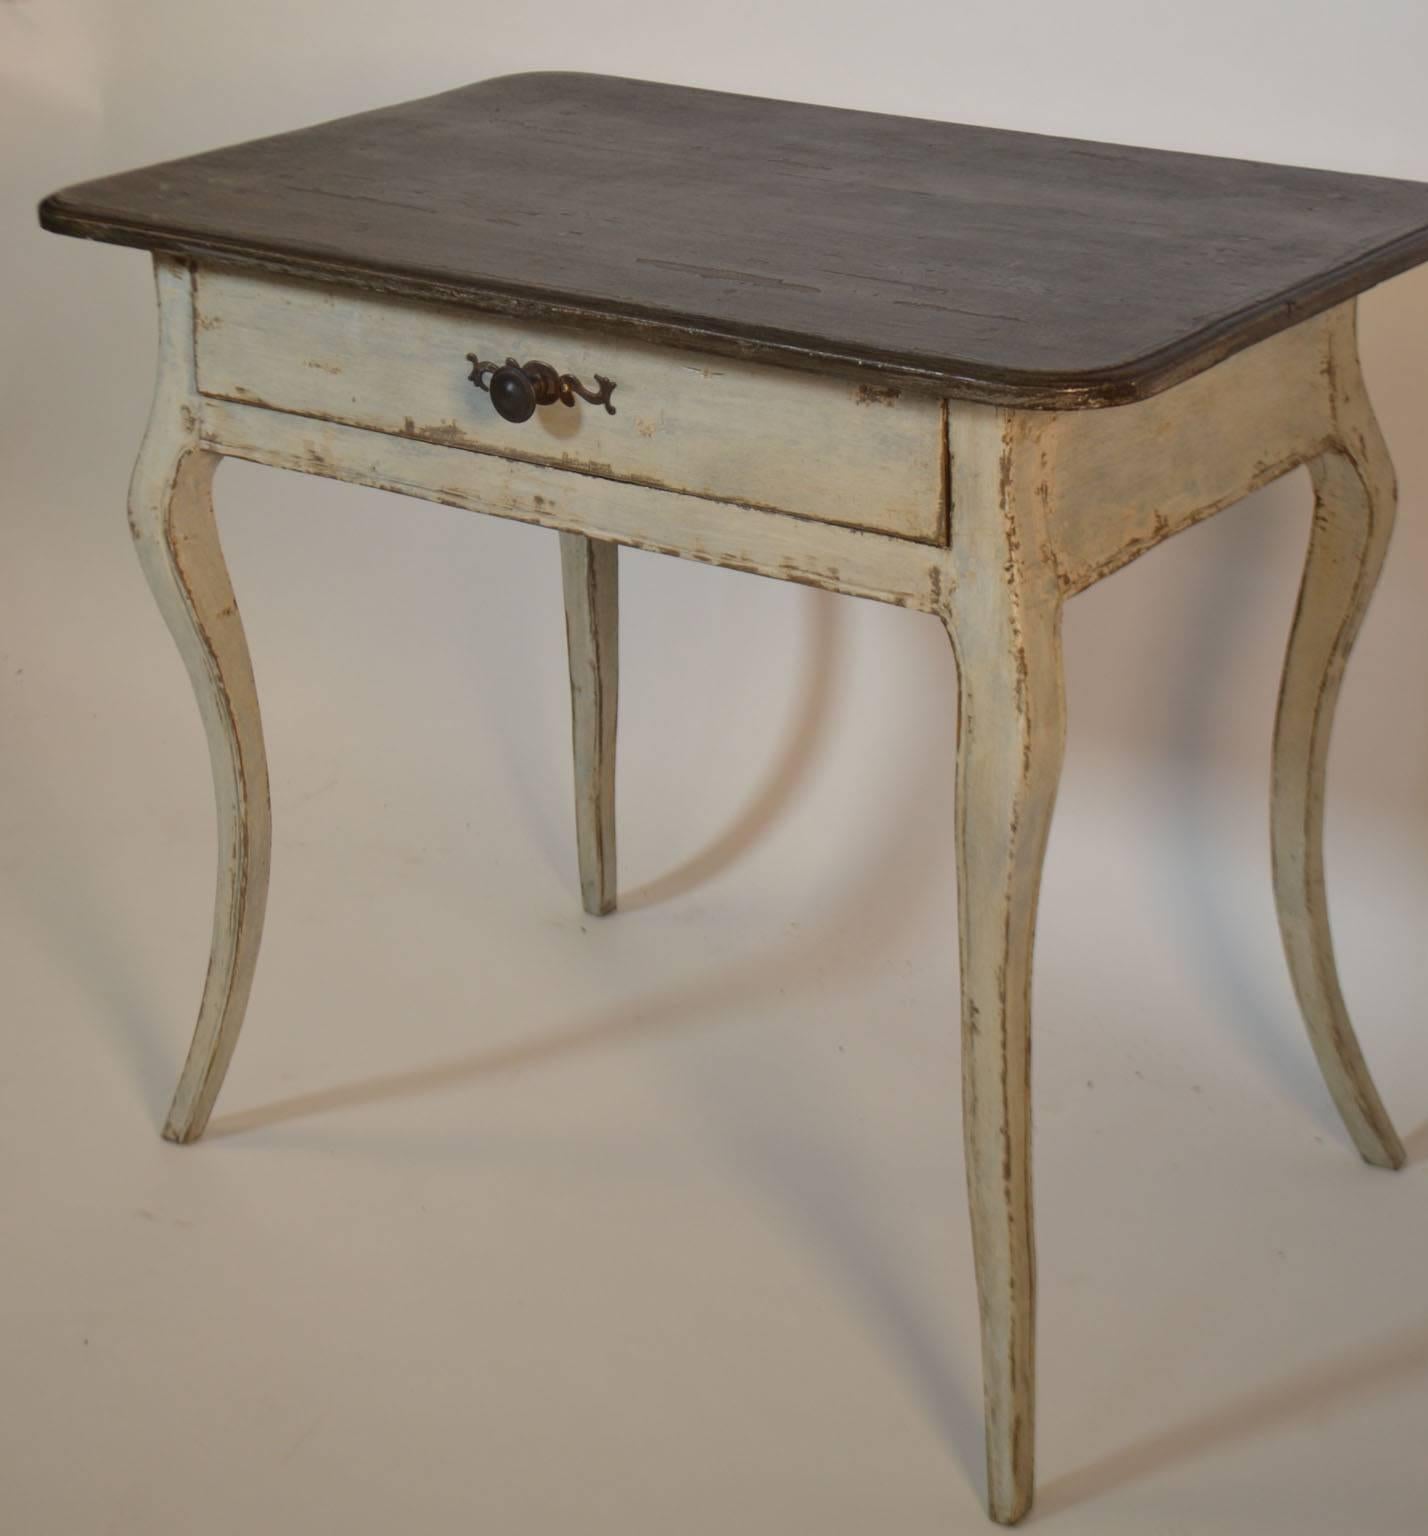 Louis XV period end table with central drawer, resting on cabriole legs, circa 1760.